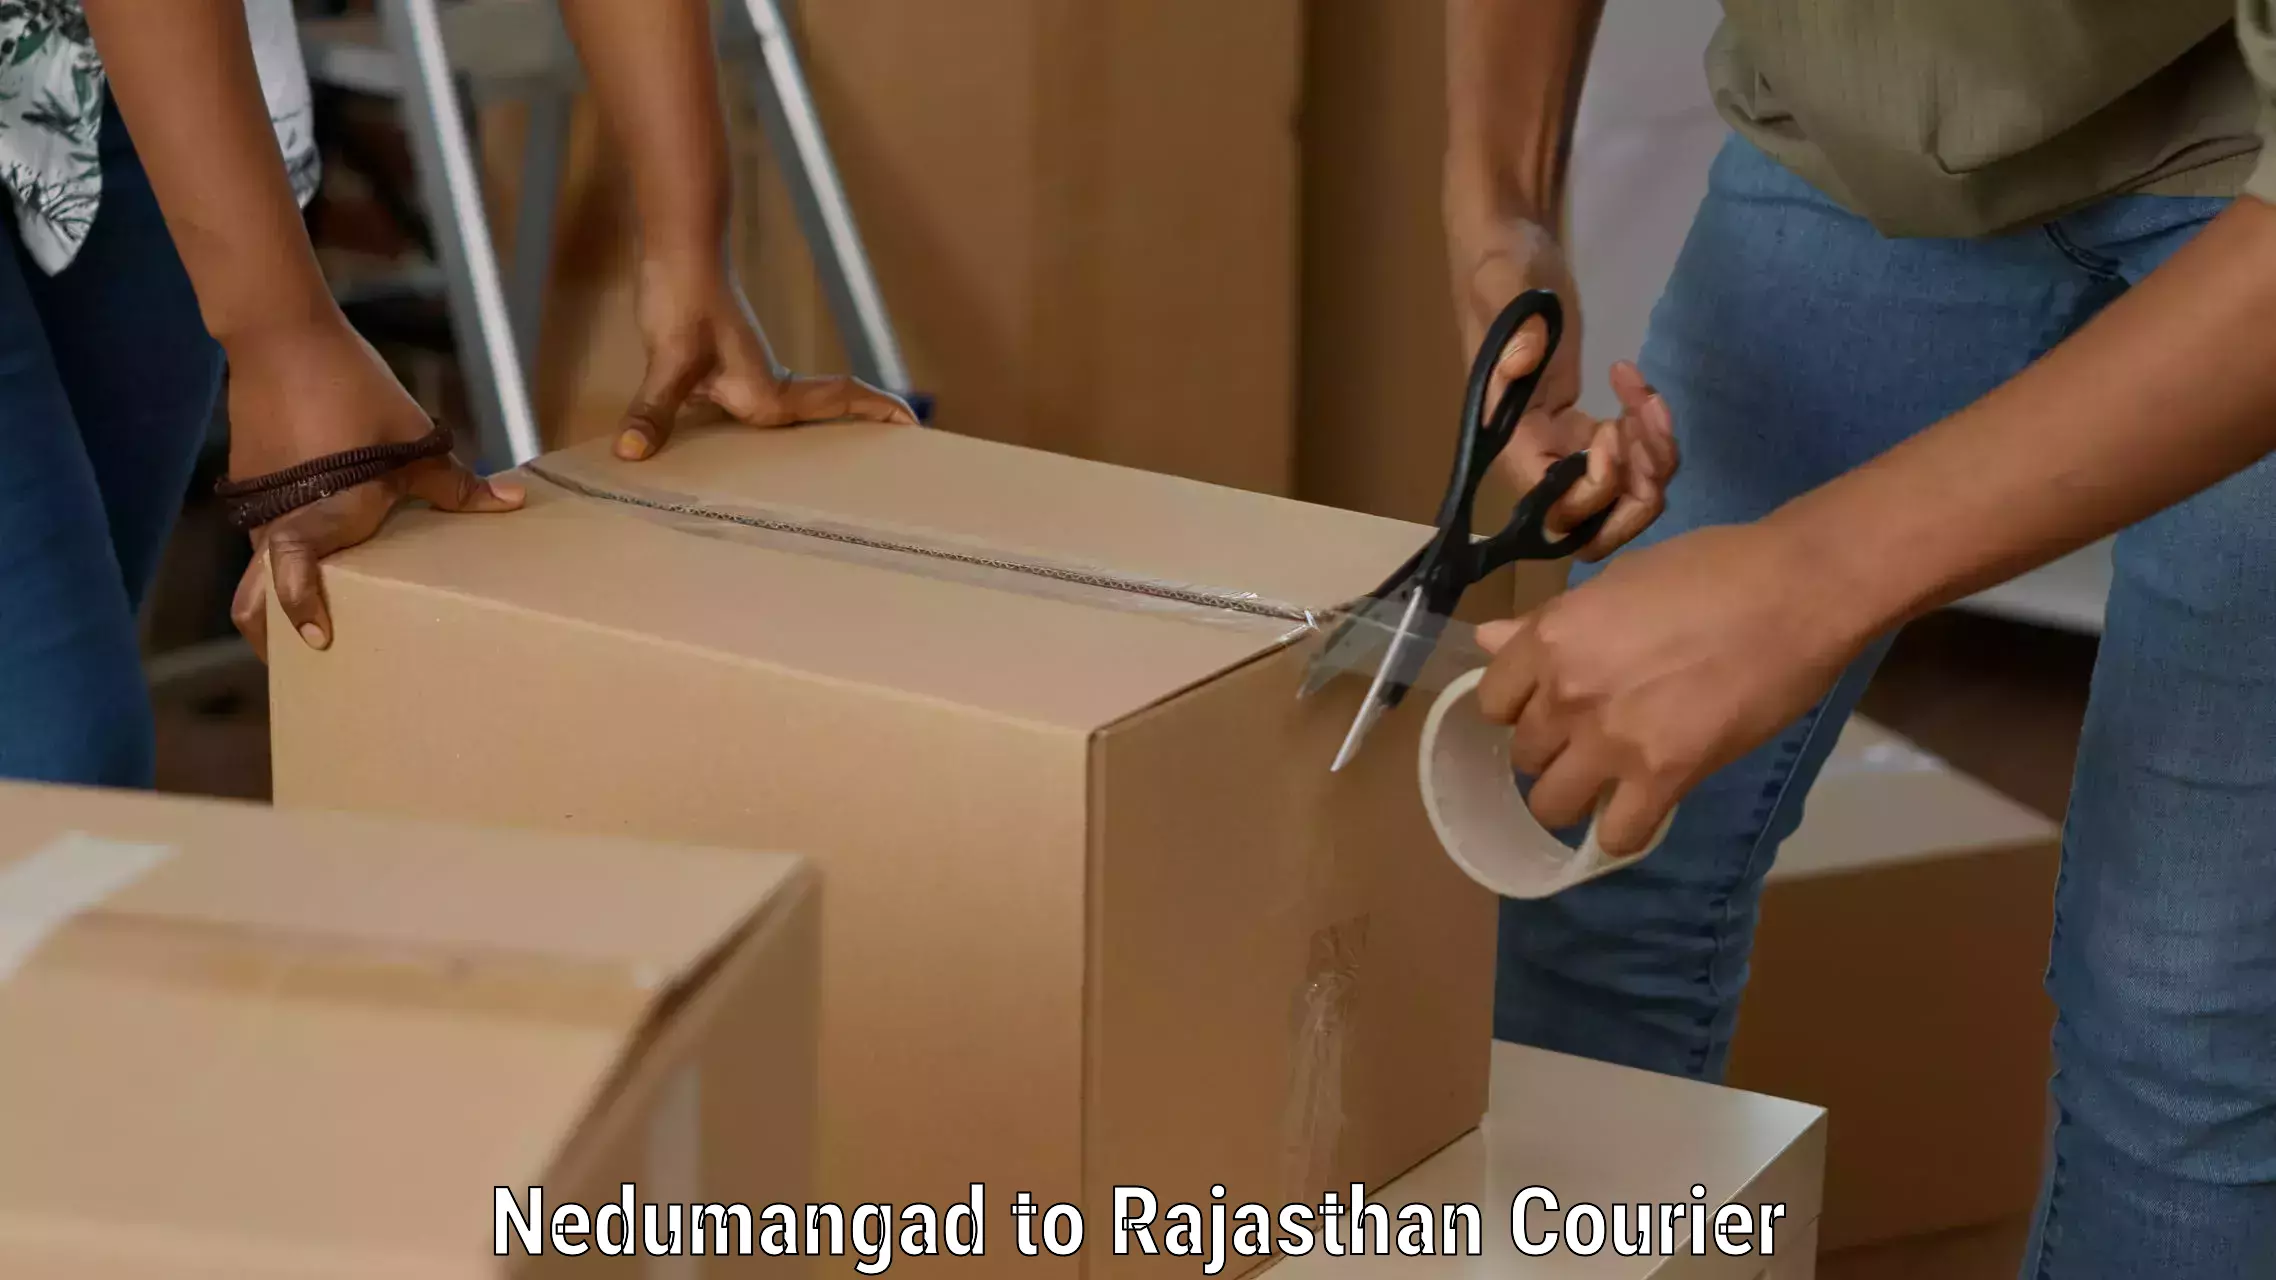 Nationwide shipping coverage Nedumangad to Rajasthan